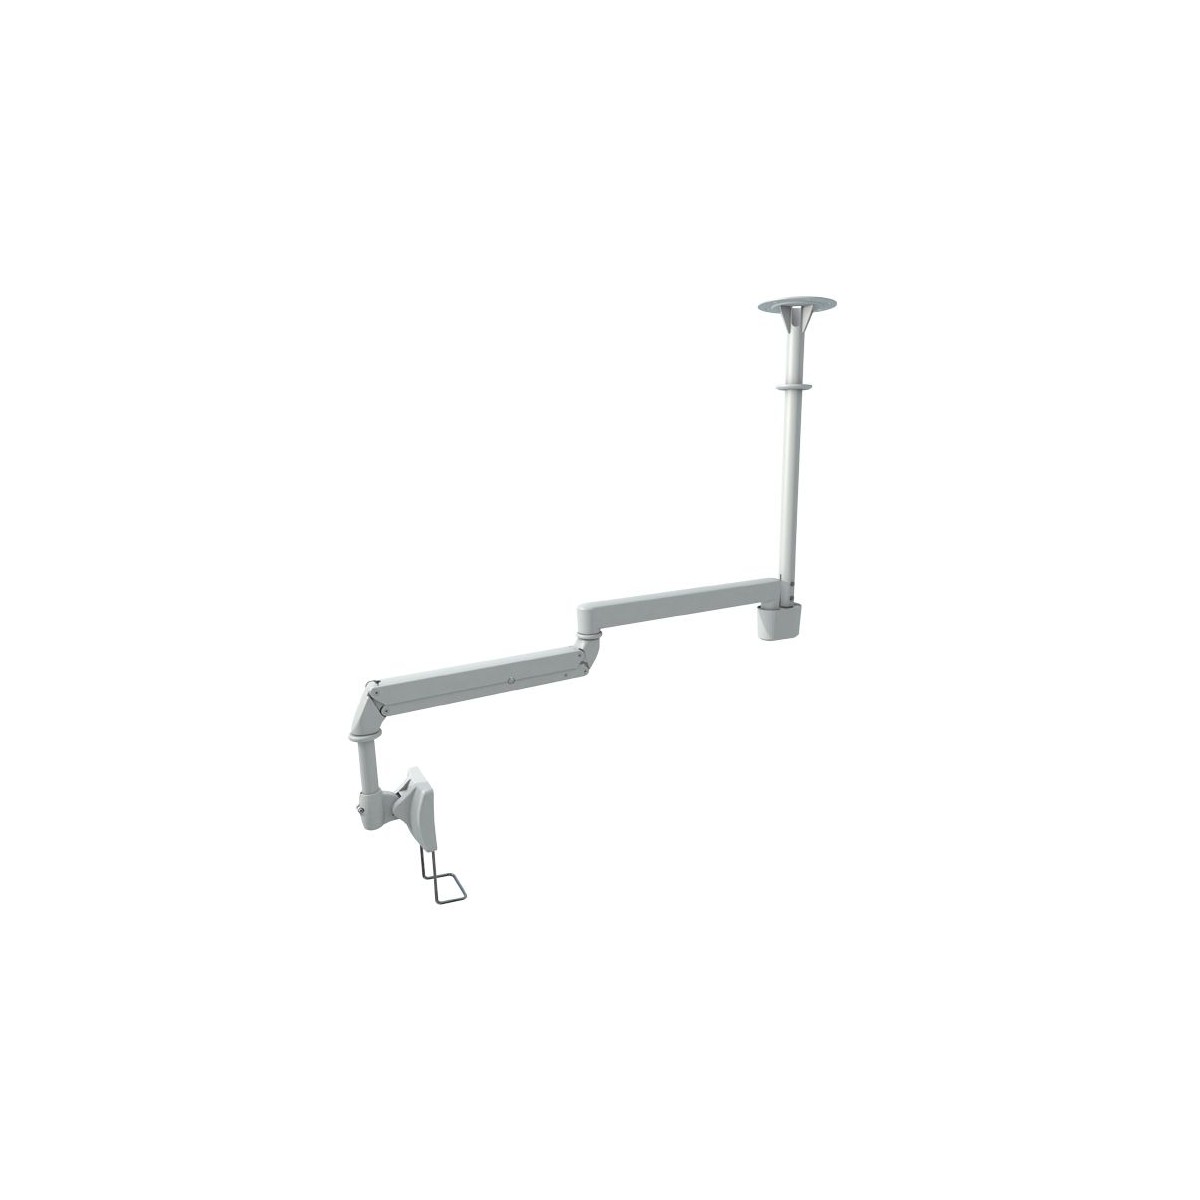 Aavara AMR20 Cantilever Medical ARM (Capacity 2.5-6.5kg) - Ceiling Type